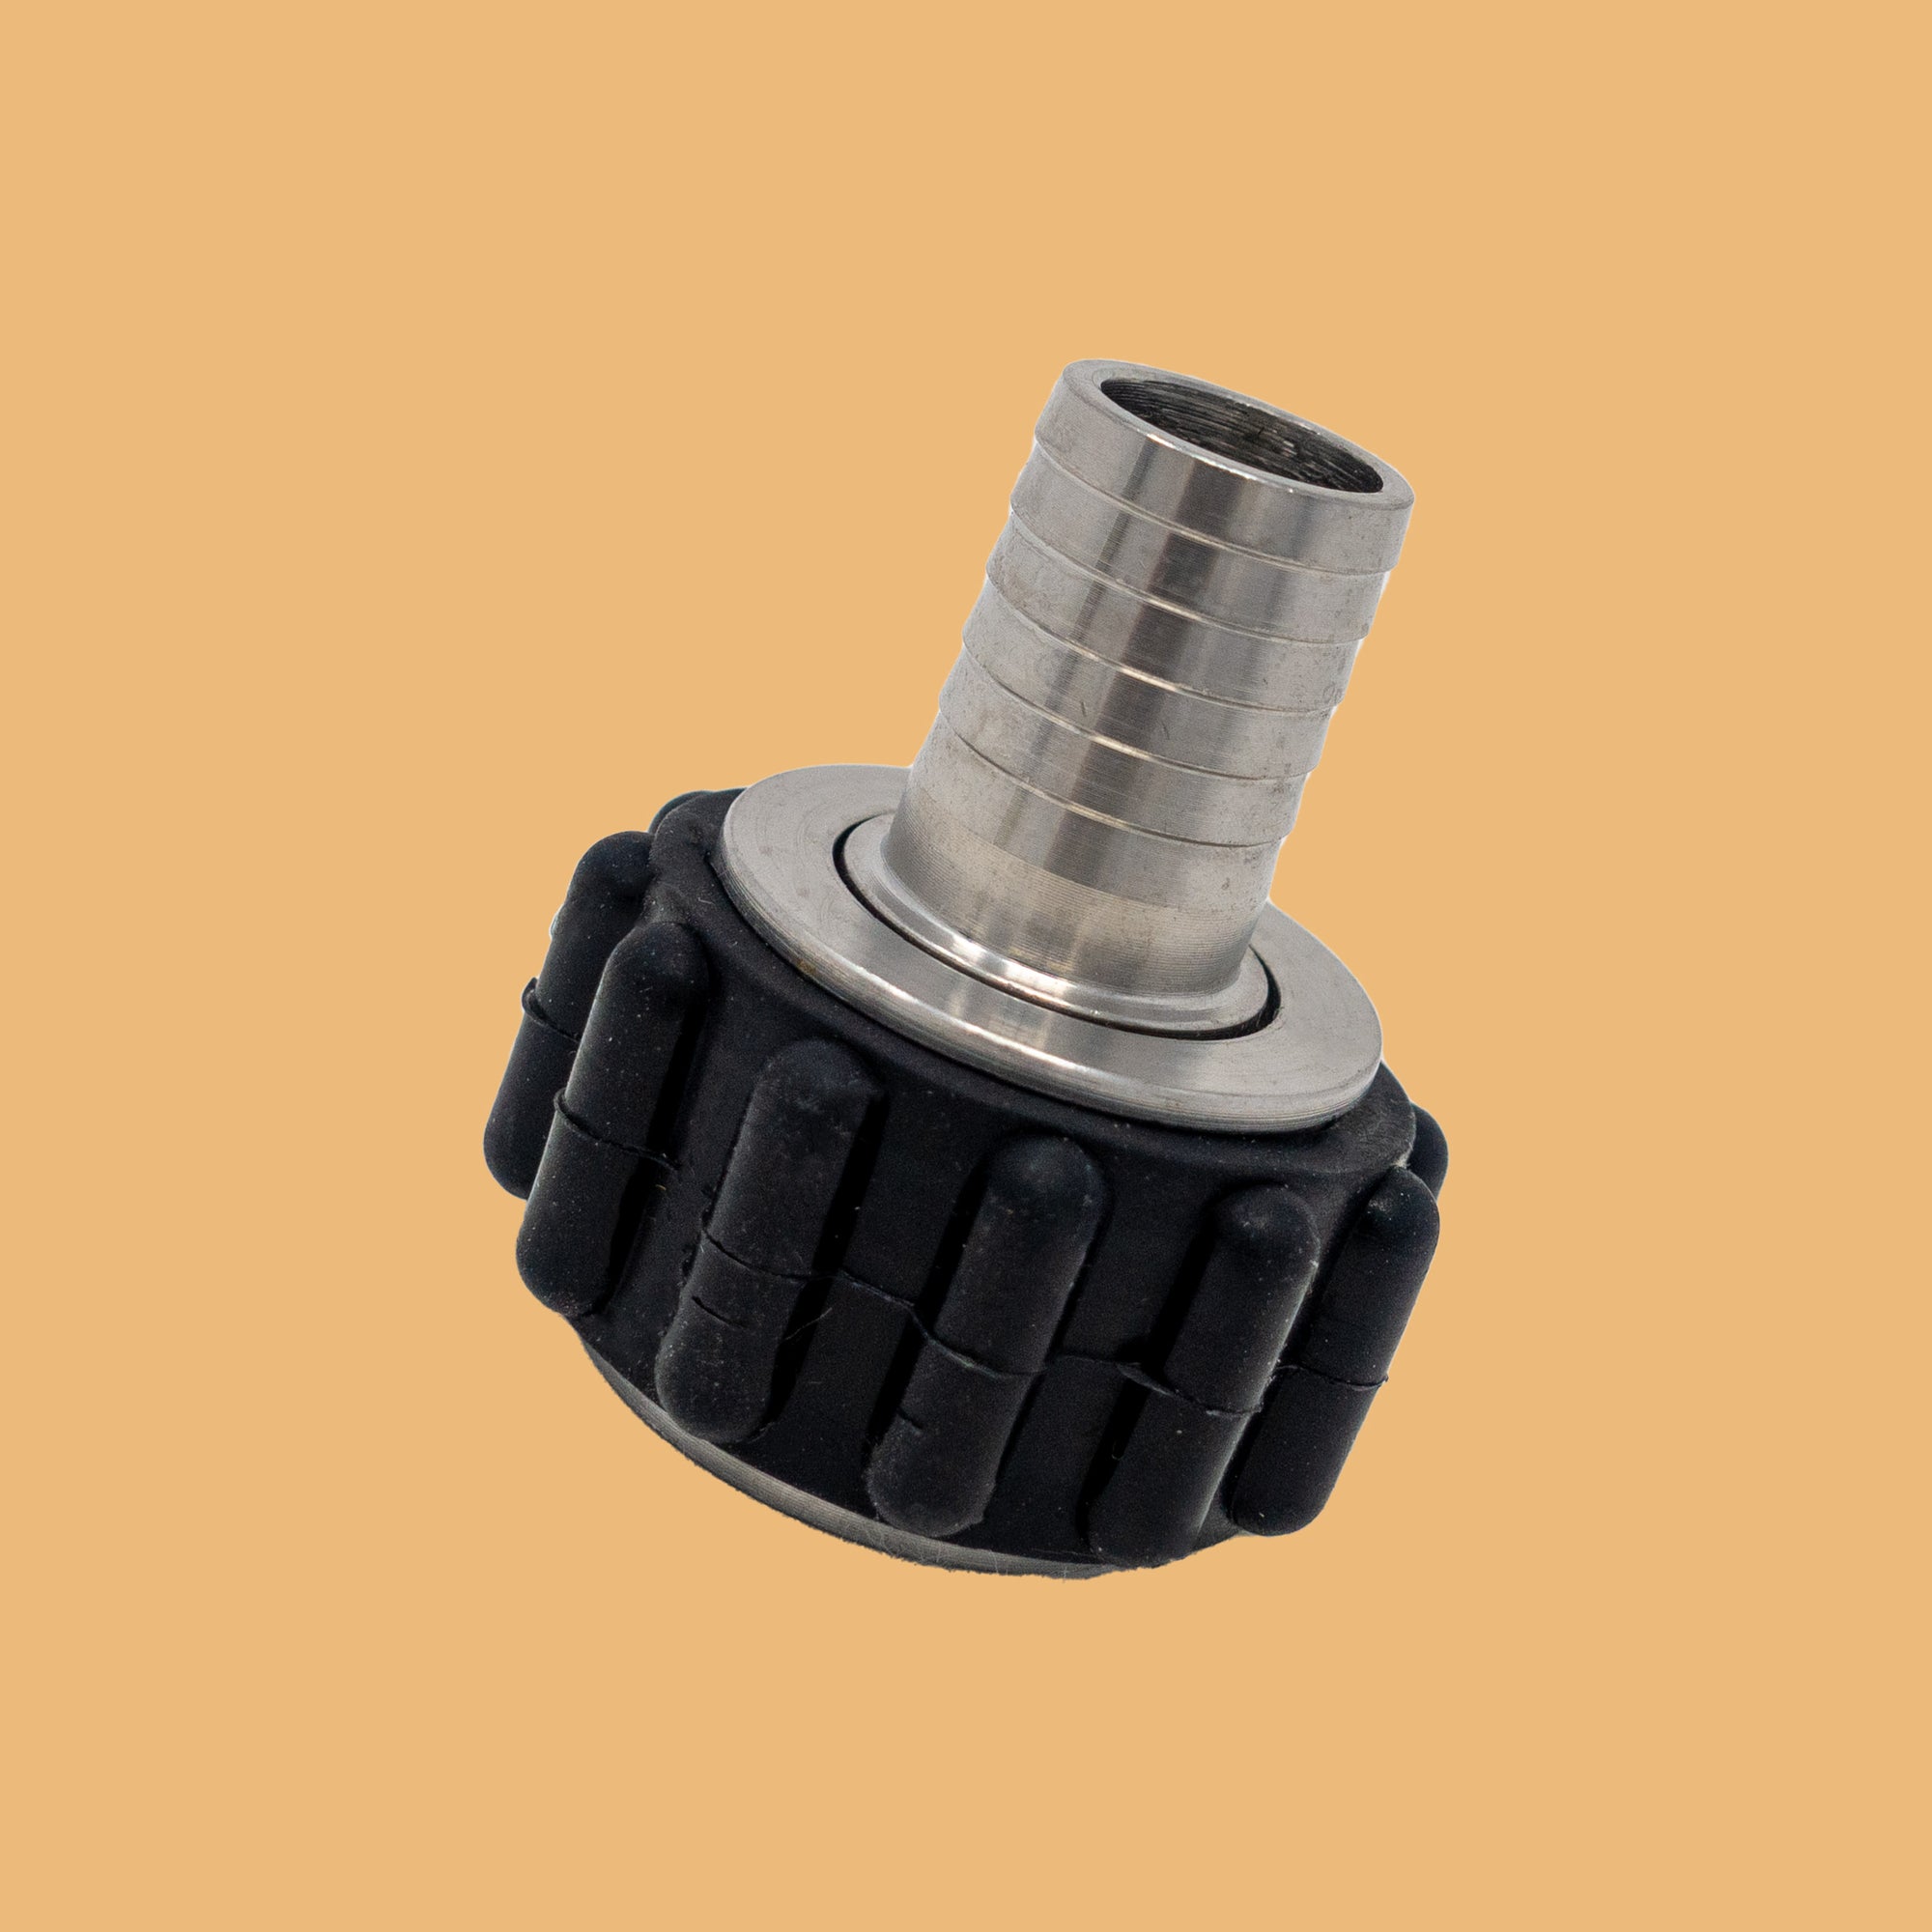 Quick Connector - 1/2" Female NPT x 1/2" OD Barb